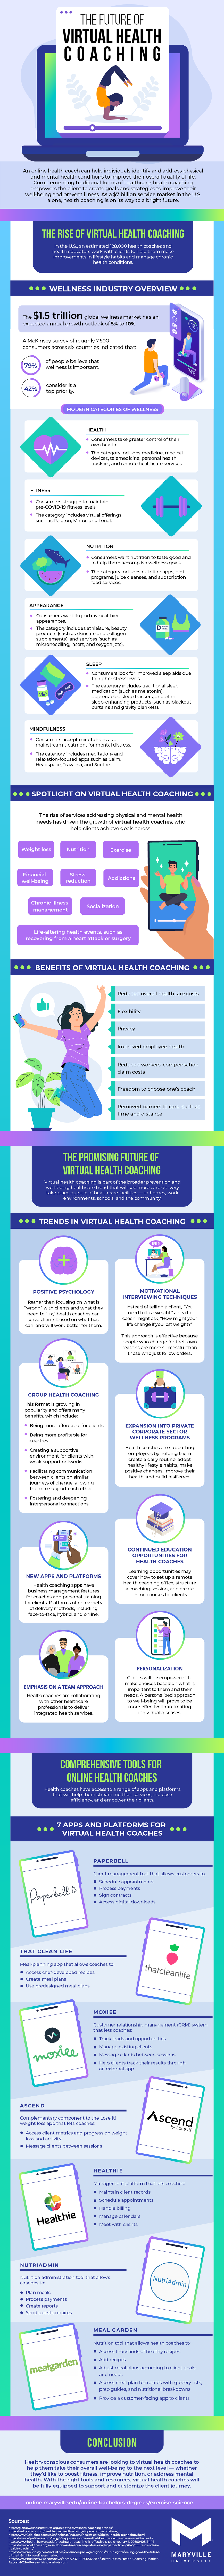 The rise and future of virtual health coaching.